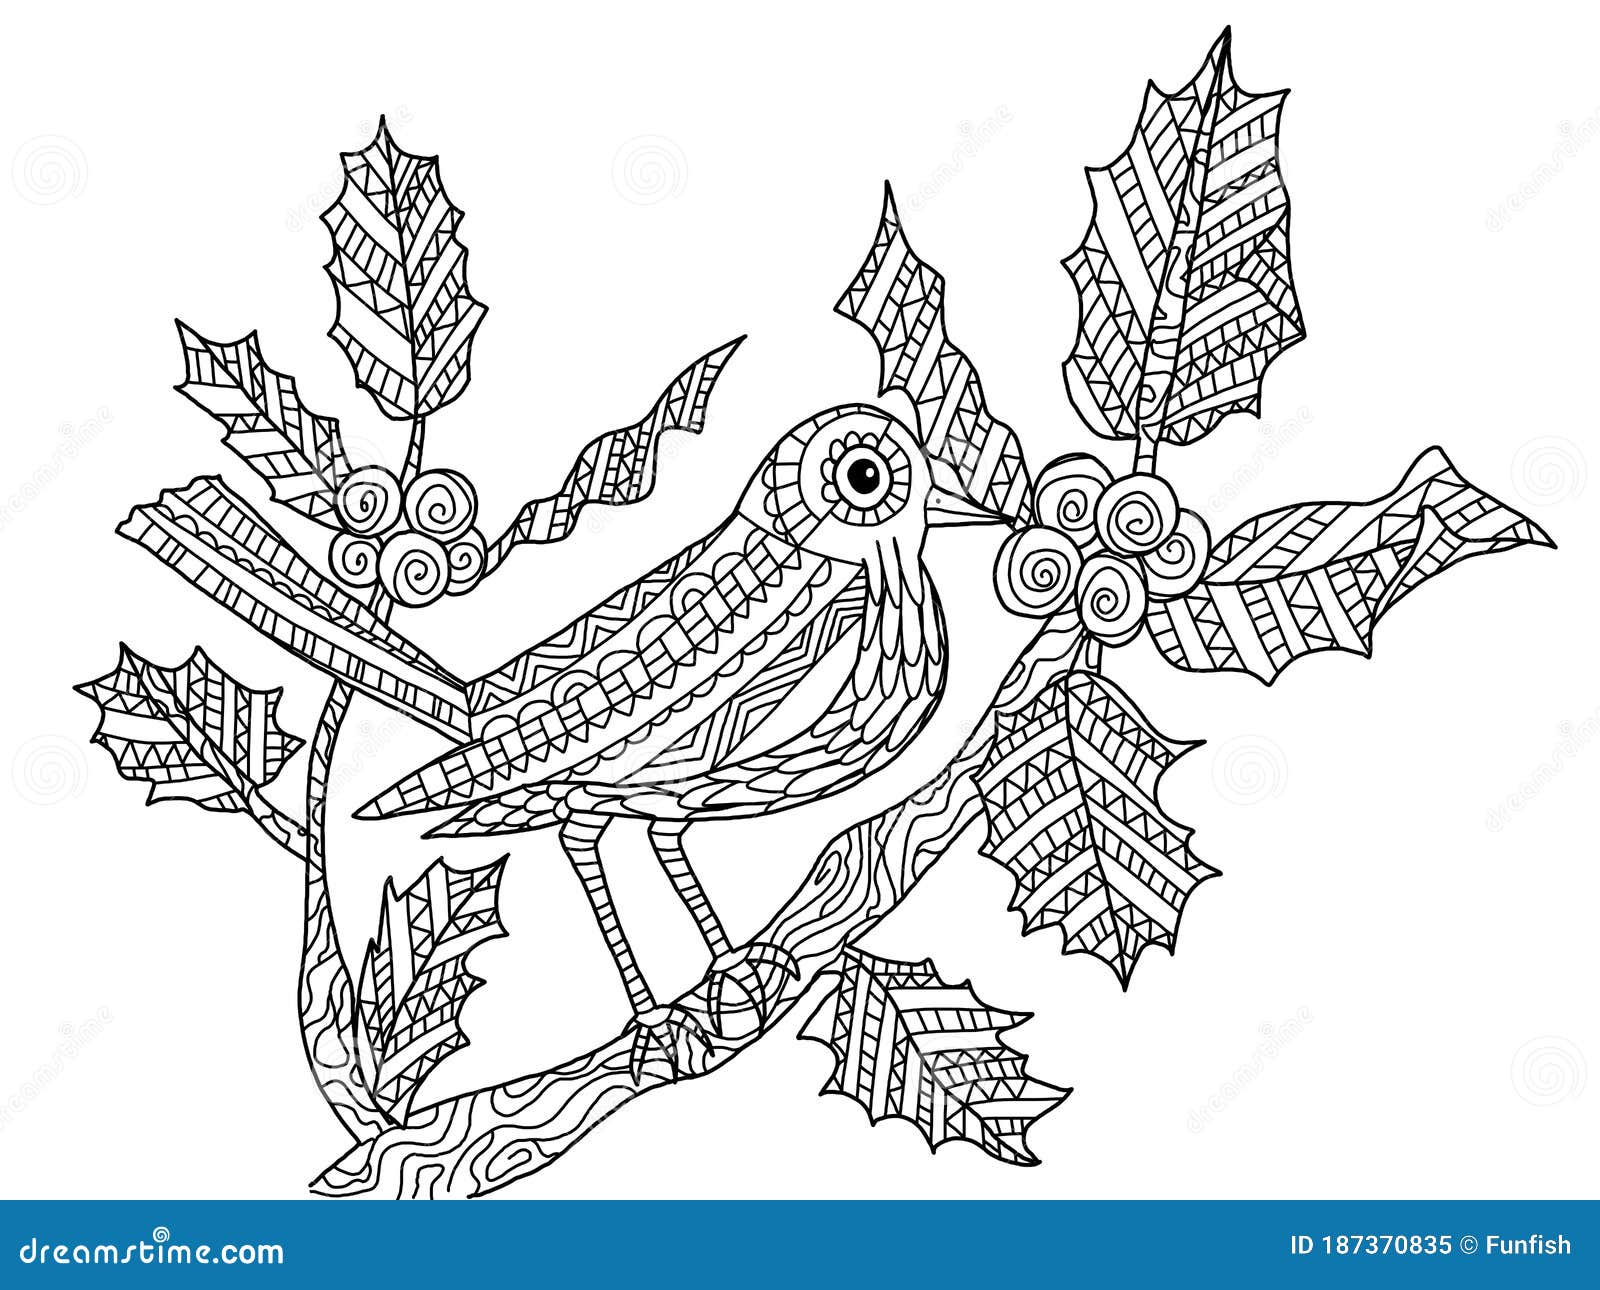 Songbird on Tree Branch with Flowers Coloring Page Stock ...